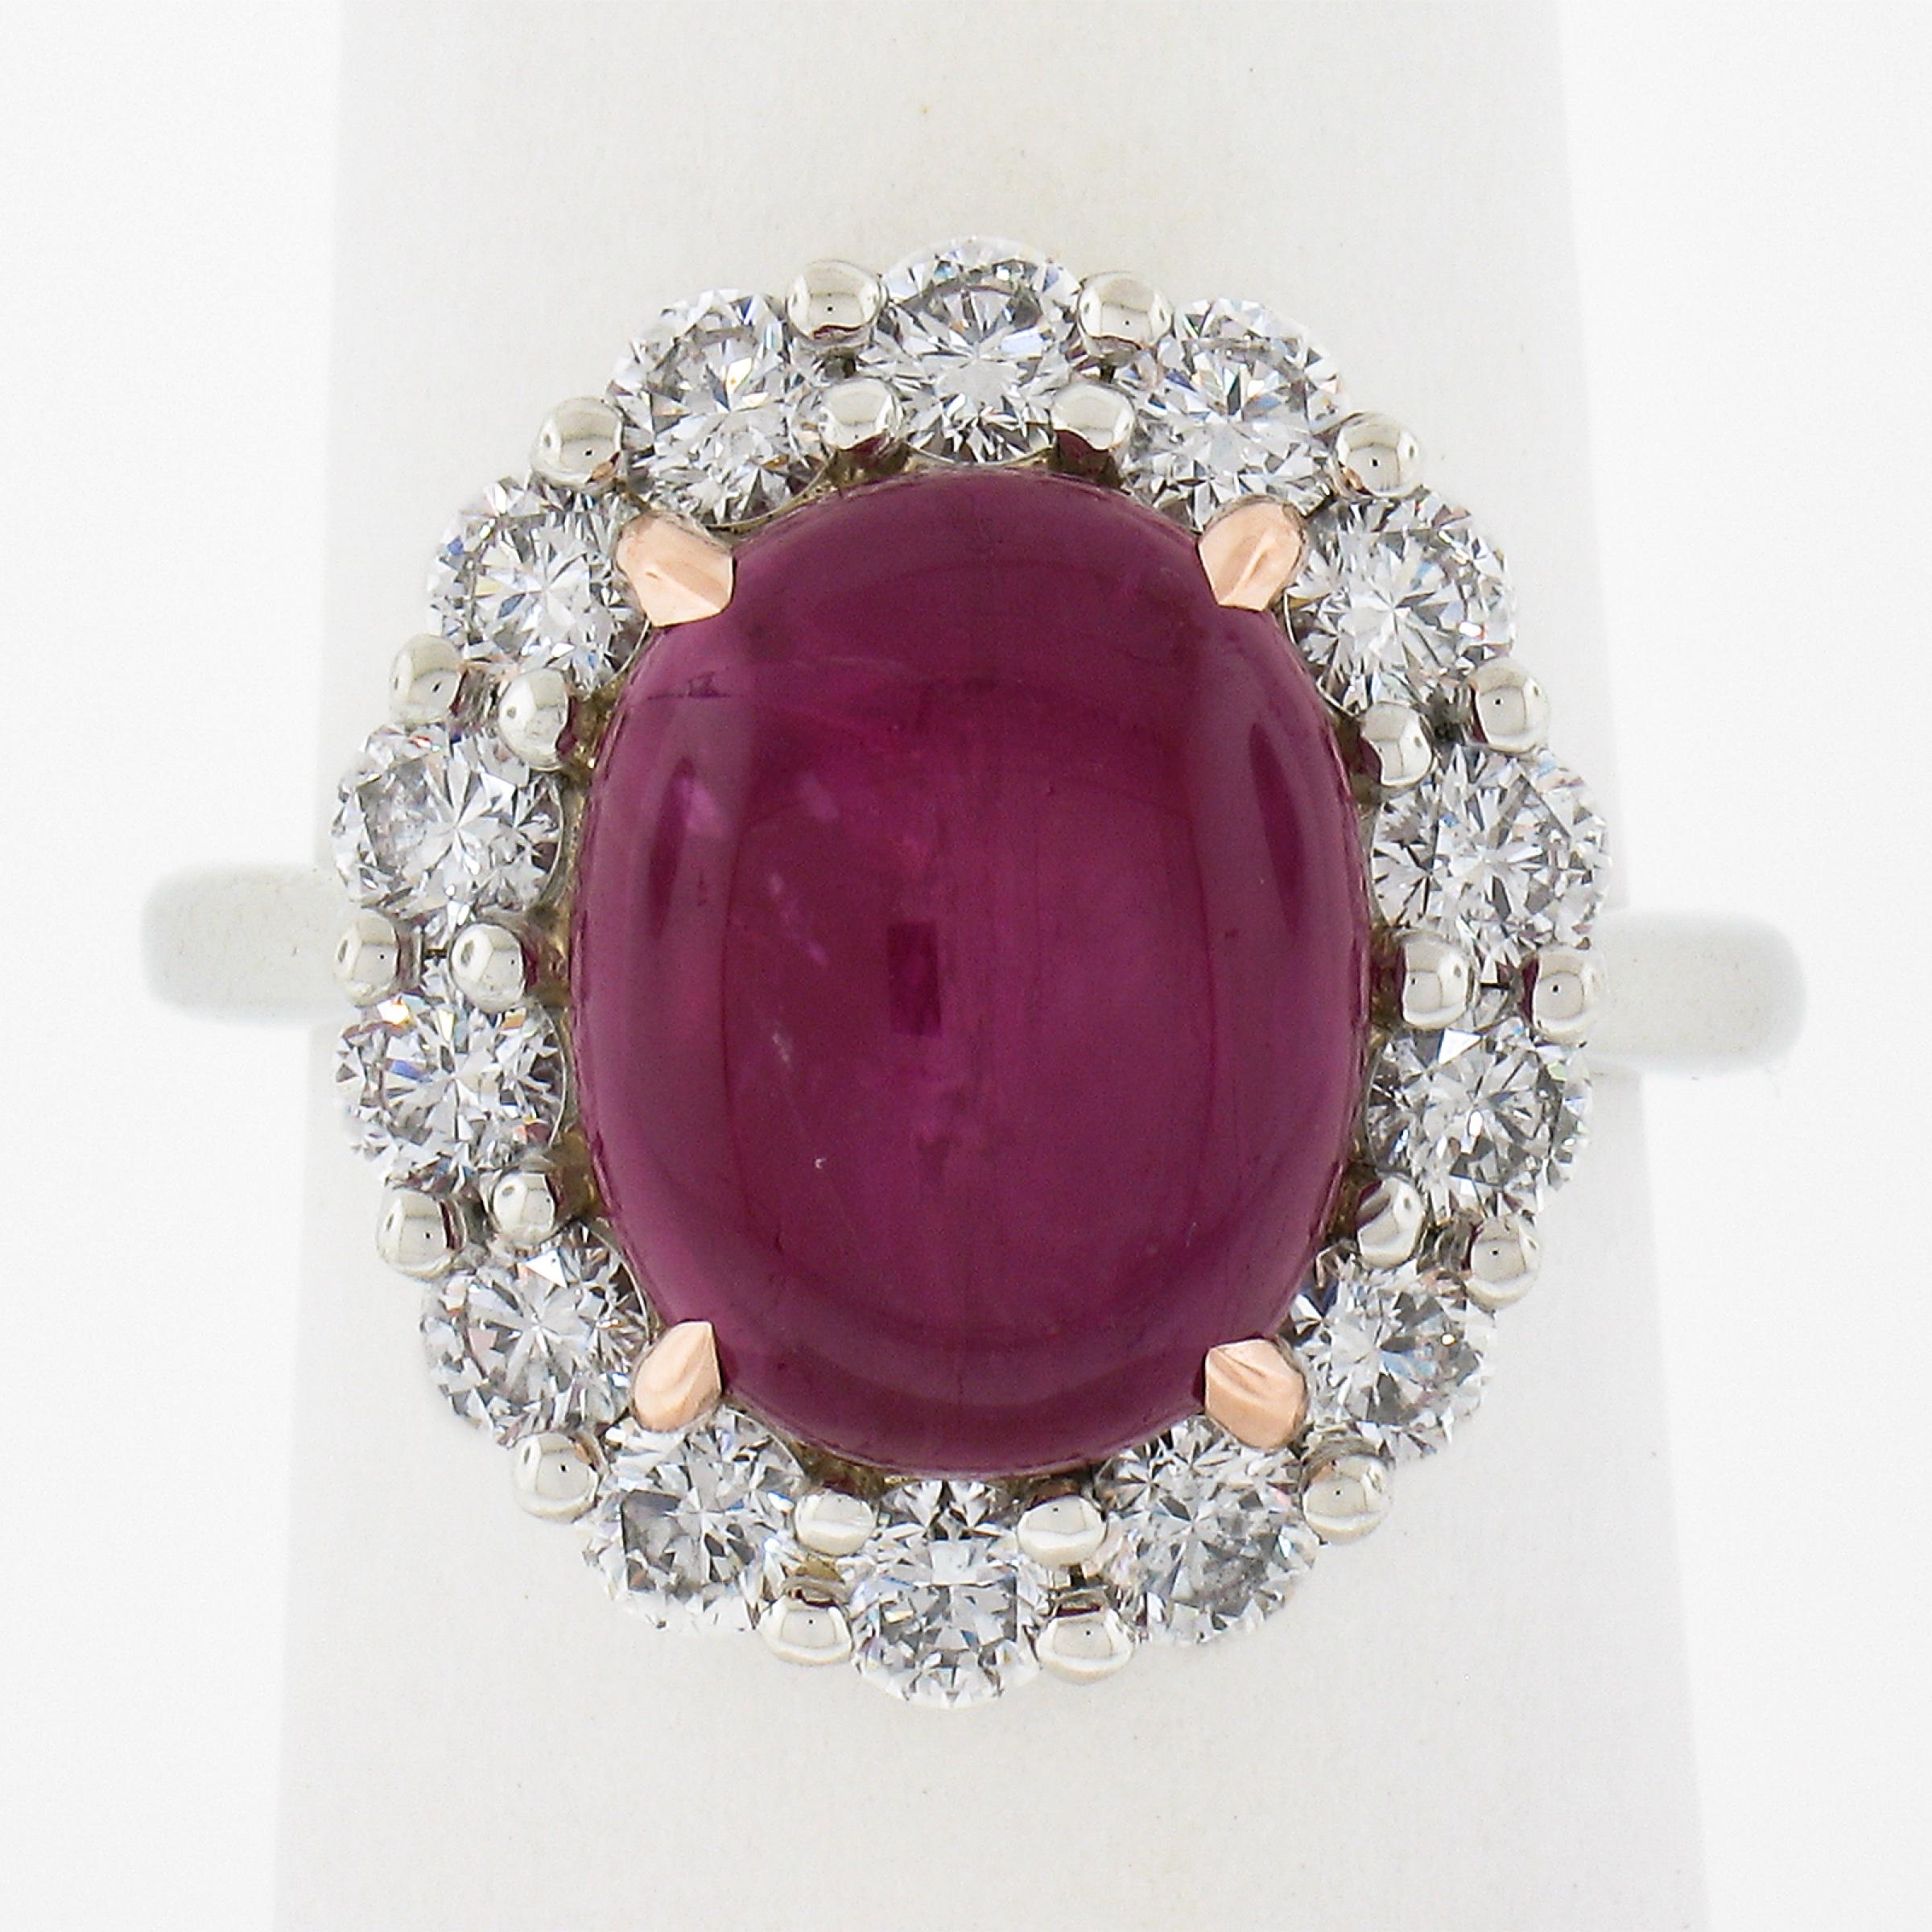 This elegant and attractive cocktail ring features a Burma origin ruby stone that displays truly attractive and eye catching purple-red color through its oval cabochon cutting style. It is surrounded by a halo of 14 large and super brilliant round